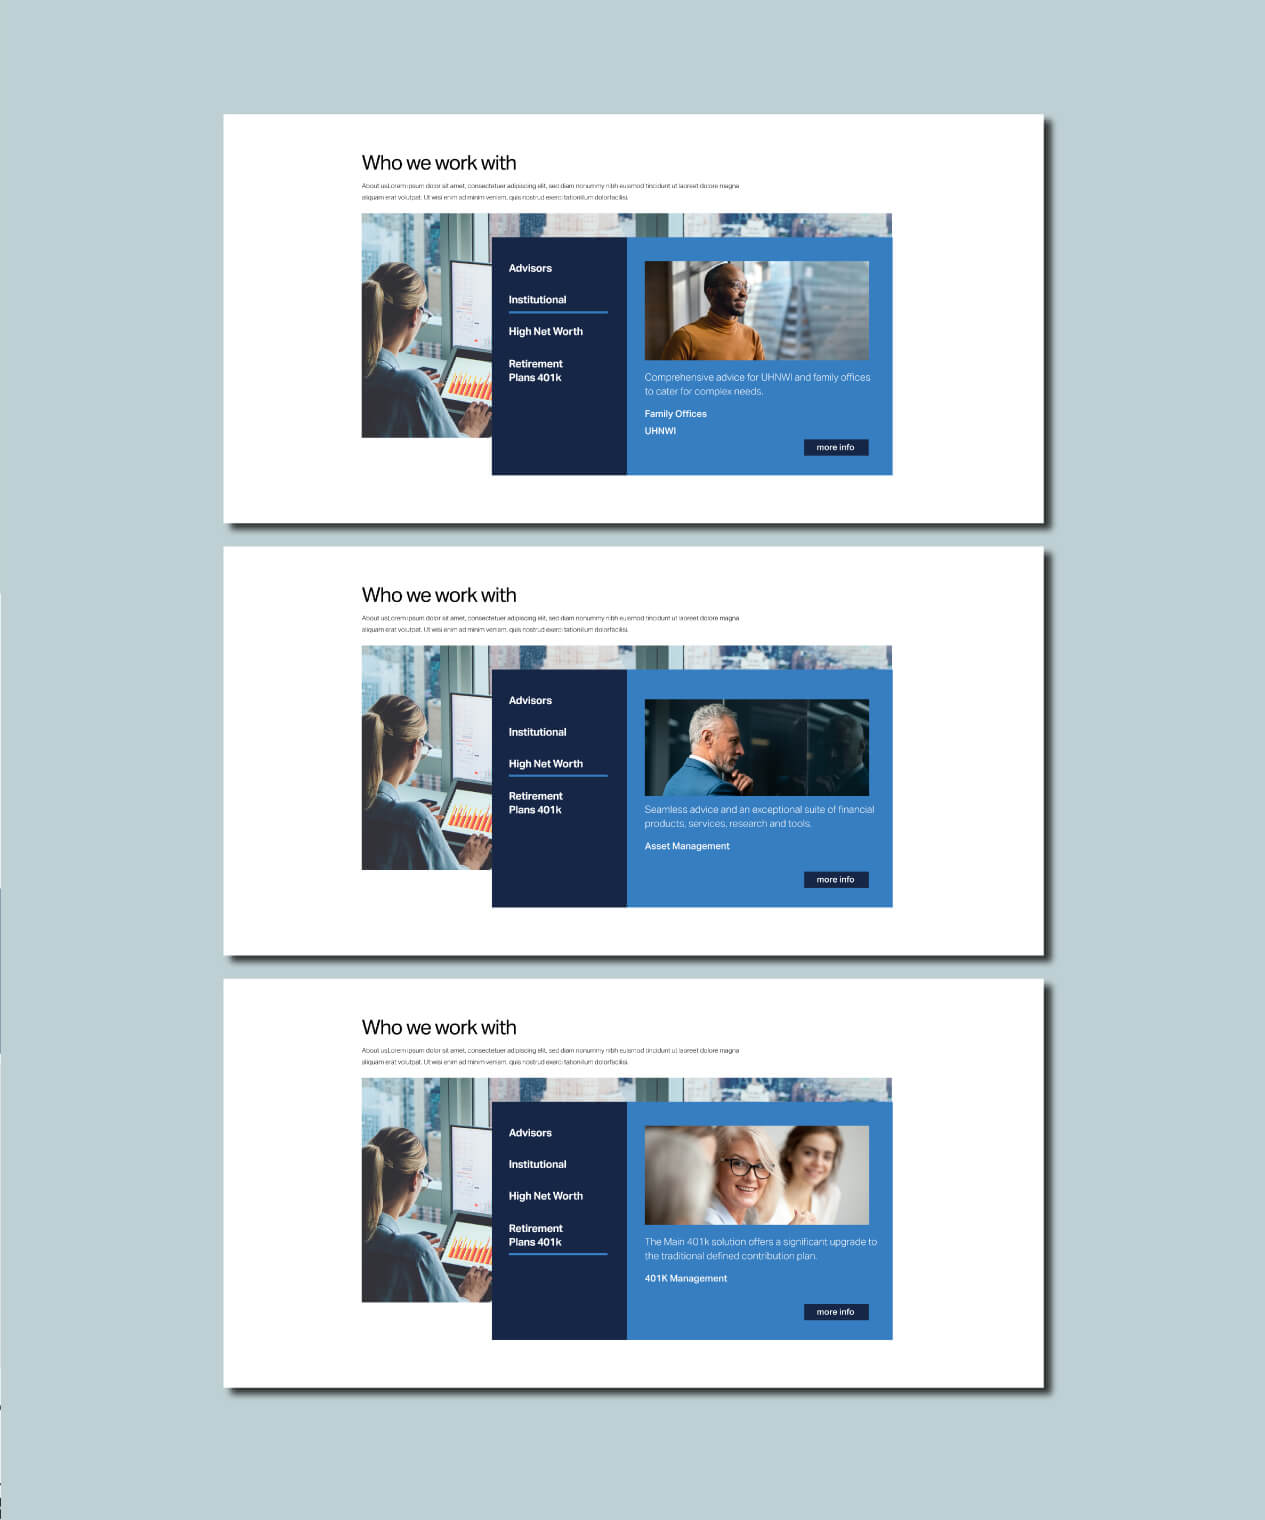 Main Management LLC website pages shown on a teal background